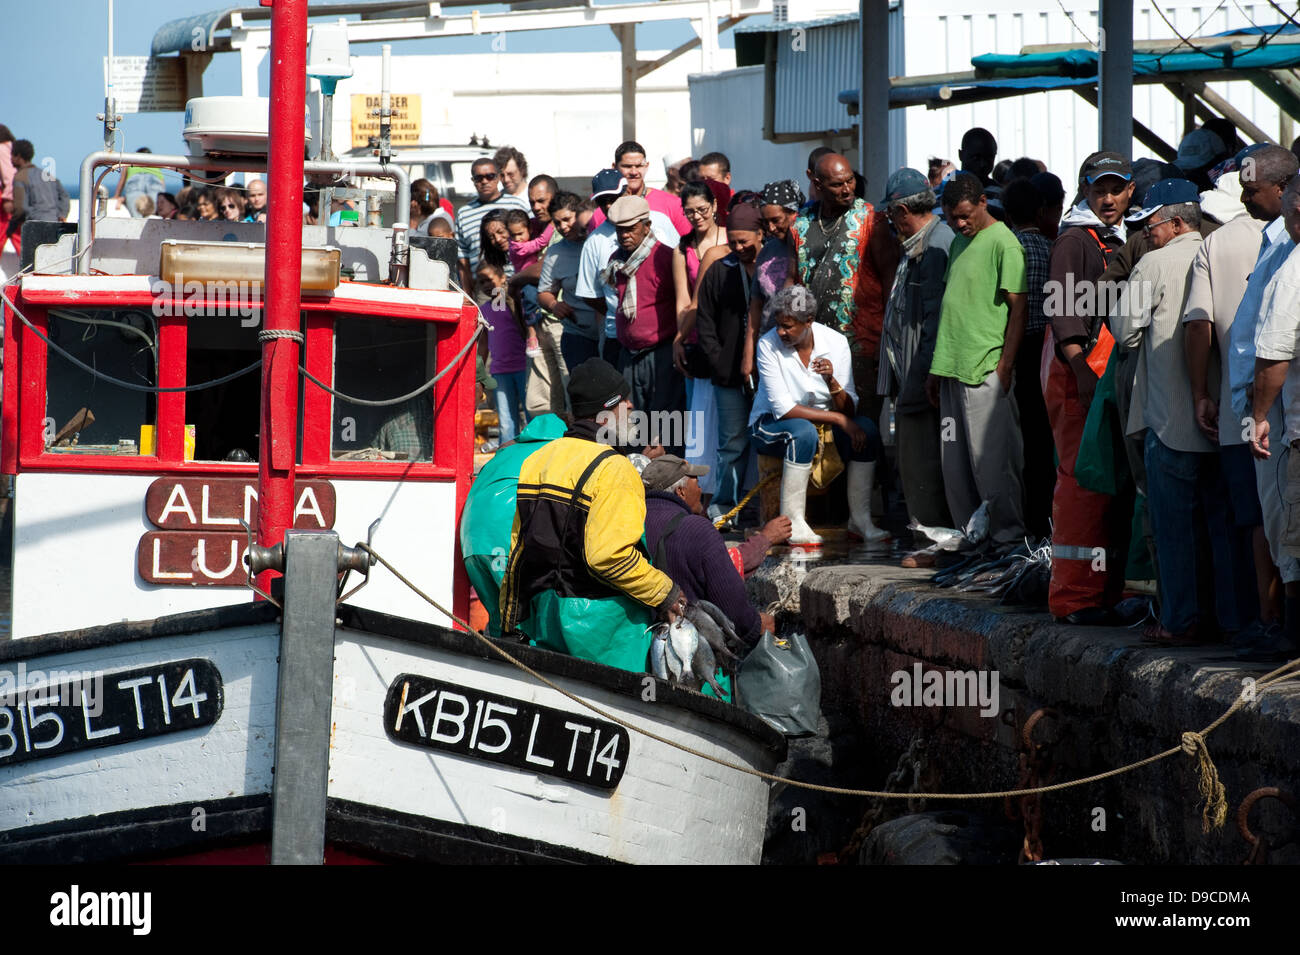 Fishing boat off loading fish in the harbour, Kalk Bay, False Bay, South Africa Stock Photo